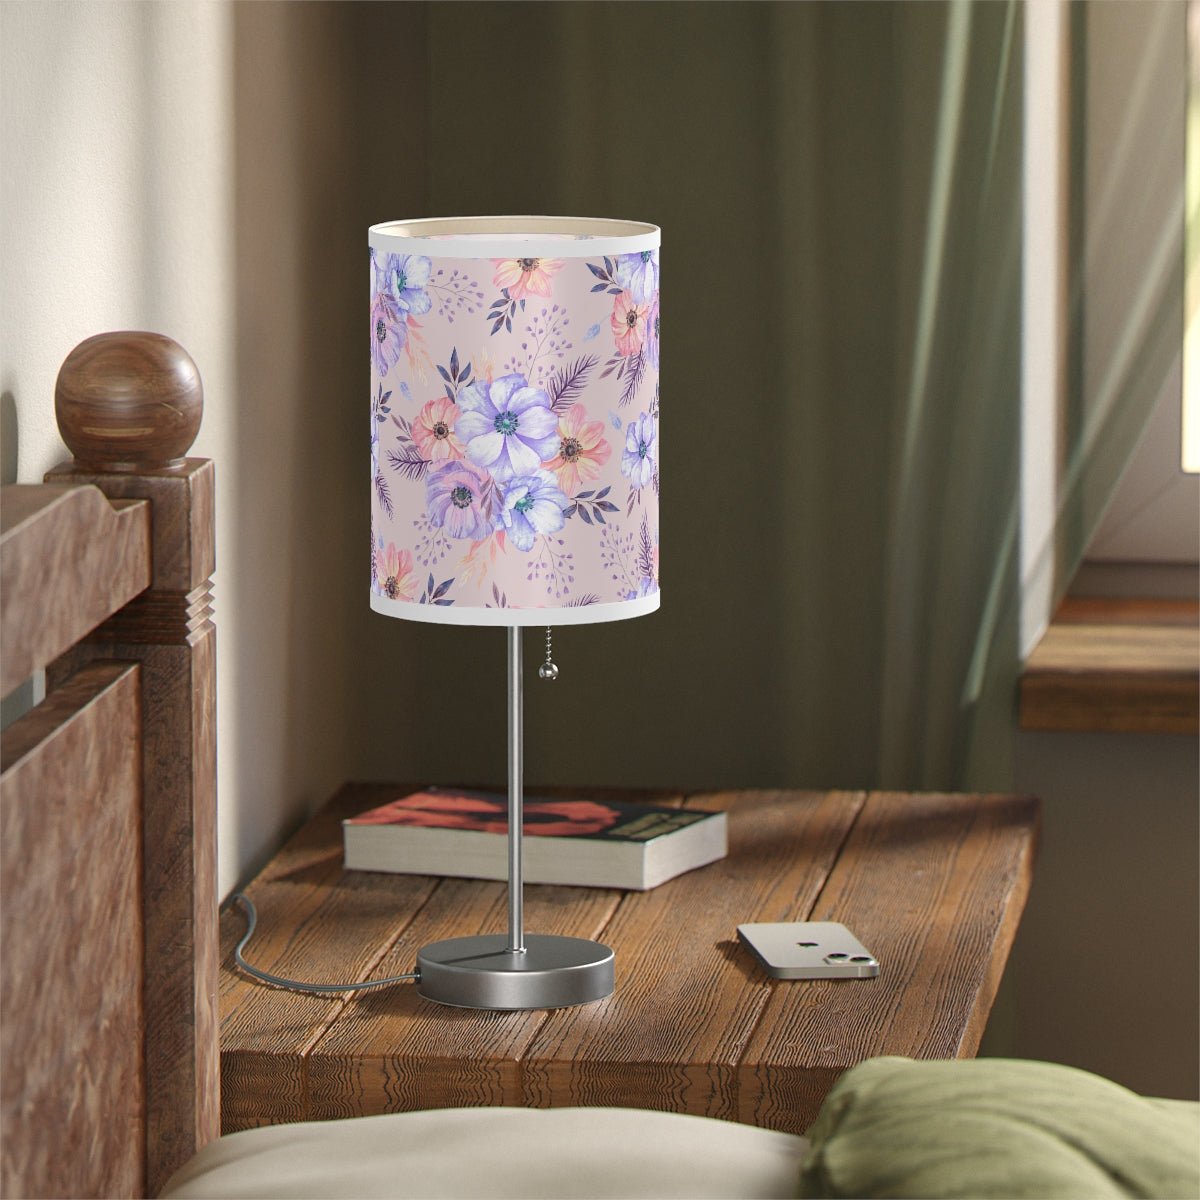 Very Peri Anemones Table Lamp - Puffin Lime